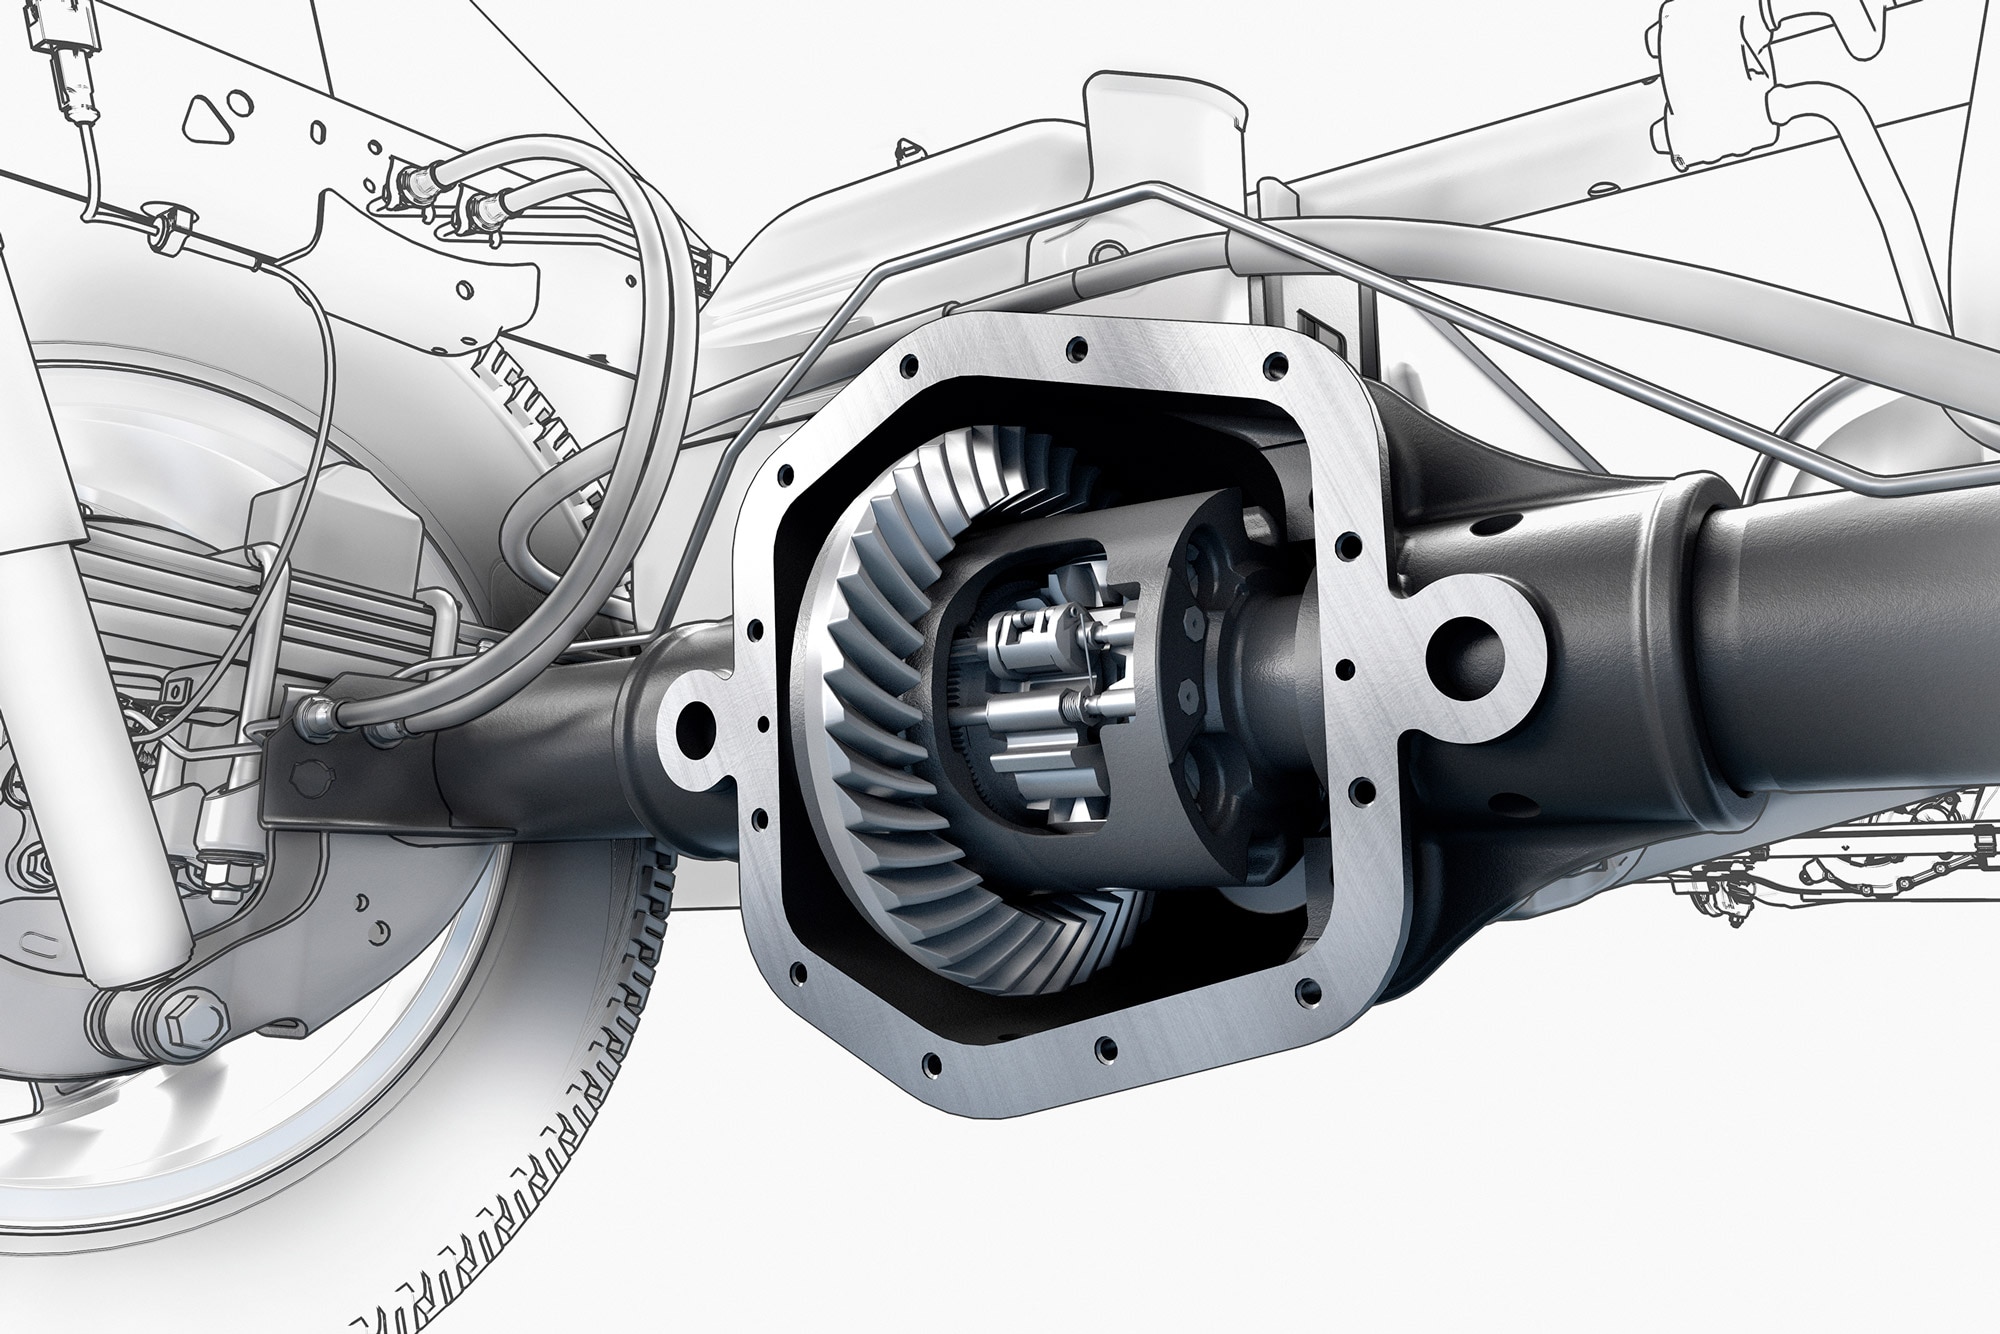 A cut-away illustration of a GMC differential on a rear axle